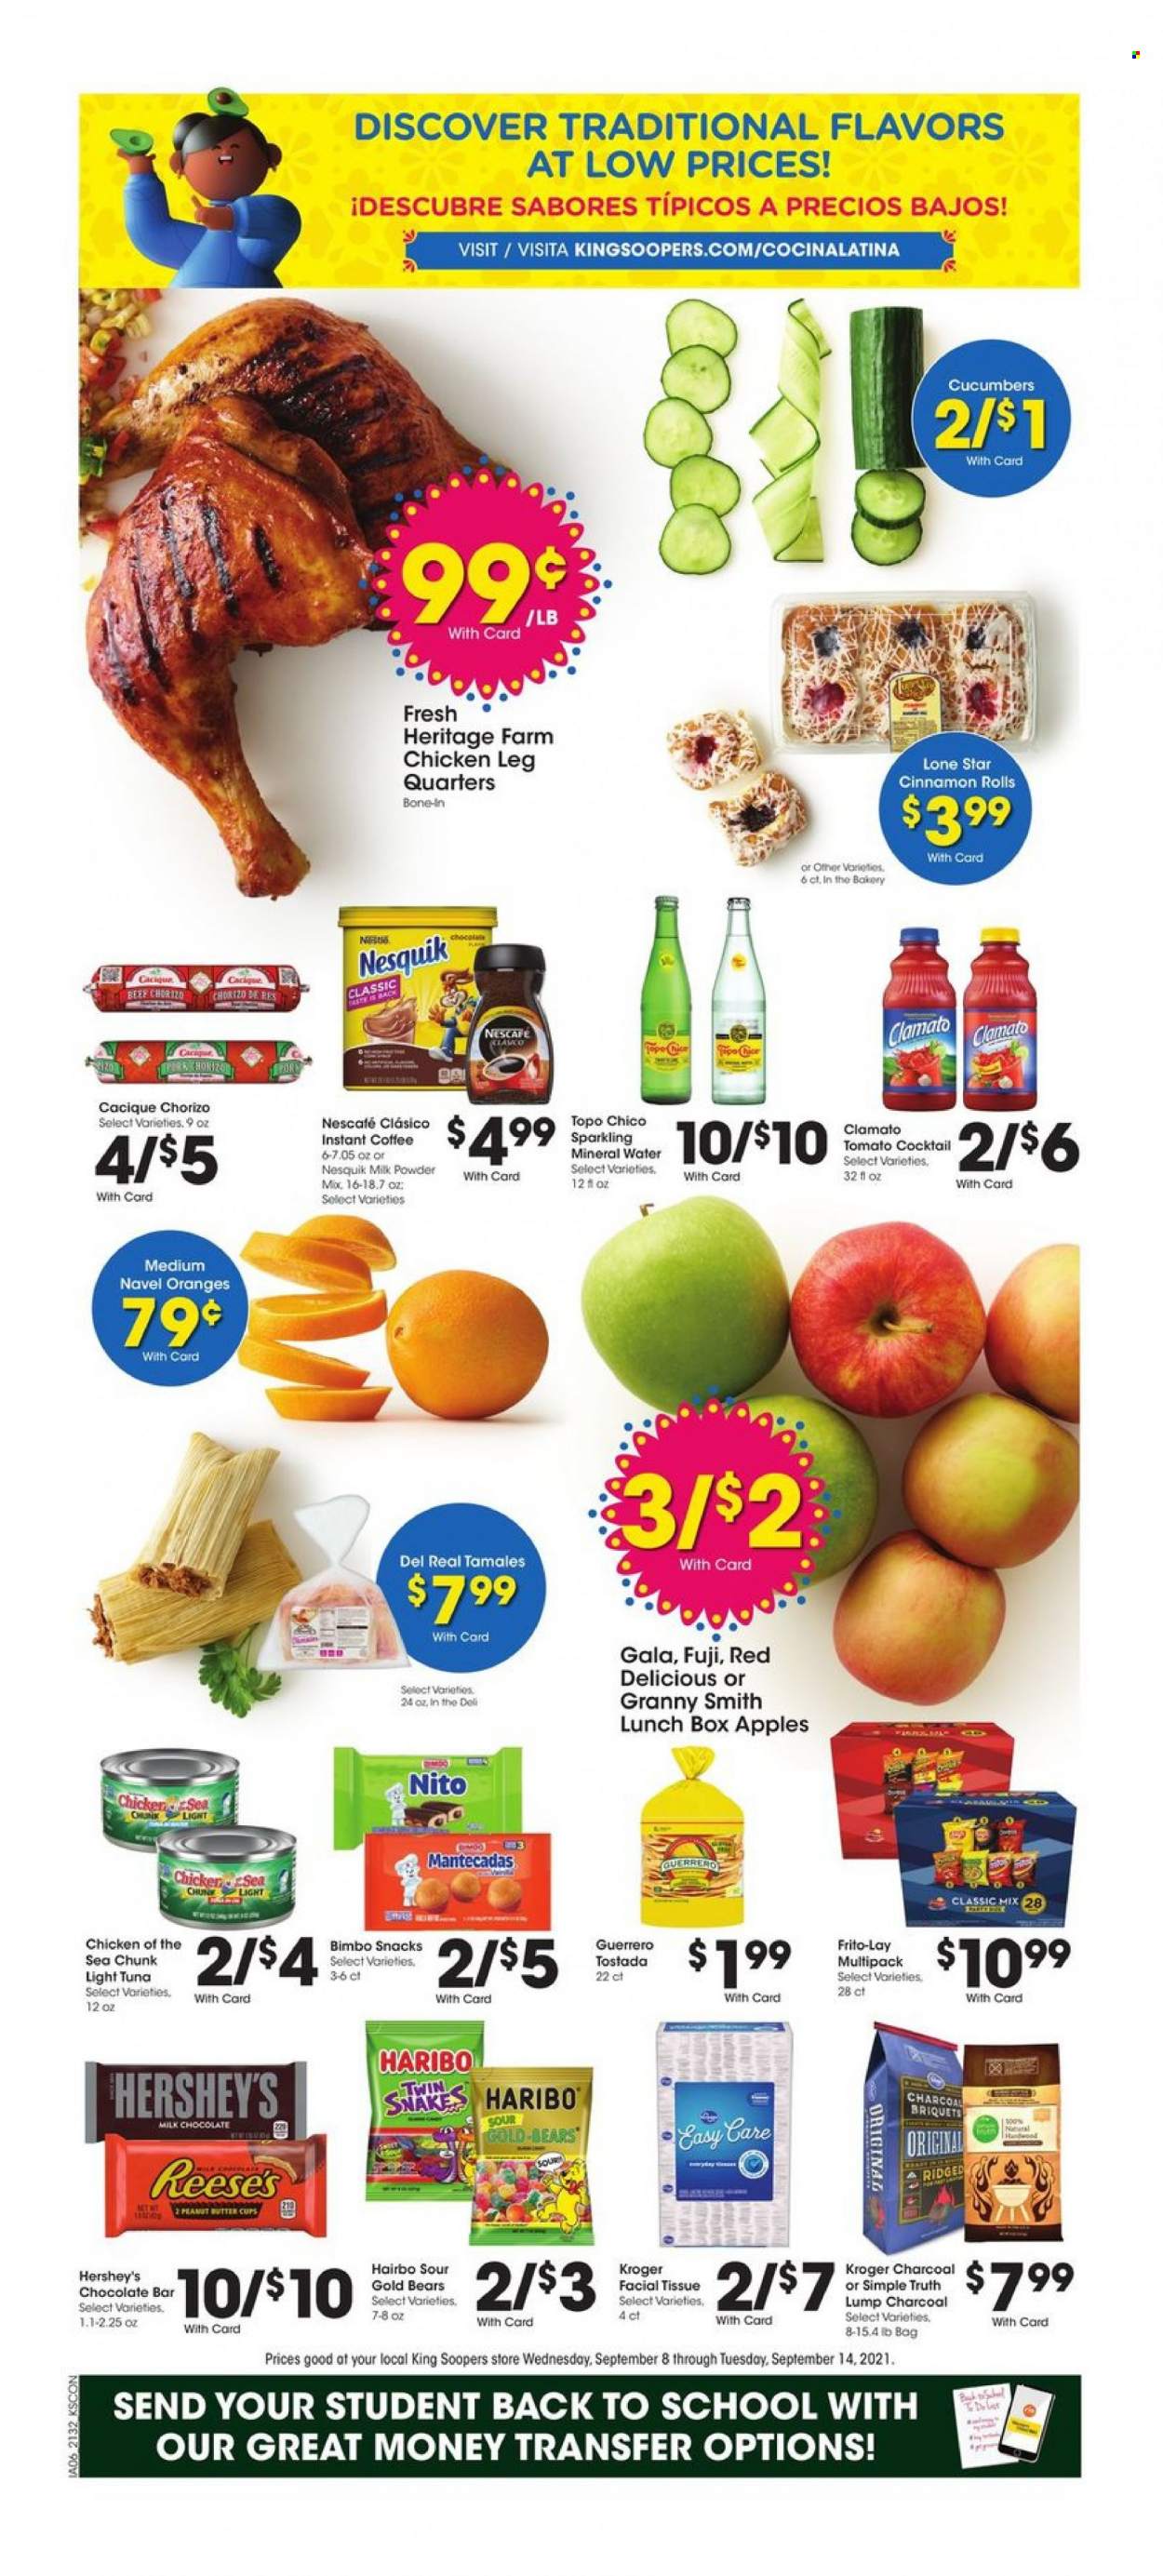 thumbnail - City Market Flyer - 09/08/2021 - 09/14/2021 - Sales products - cinnamon roll, cucumber, apples, Gala, Red Delicious apples, oranges, Granny Smith, tuna, chorizo, Nesquik, milk, milk powder, Reese's, Hershey's, snack, Haribo, chocolate bar, Frito-Lay, light tuna, Chicken of the Sea, Clamato, mineral water, sparkling water, instant coffee, Nescafé, chicken legs, tissues, cup, meal box, charcoal, navel oranges. Page 1.